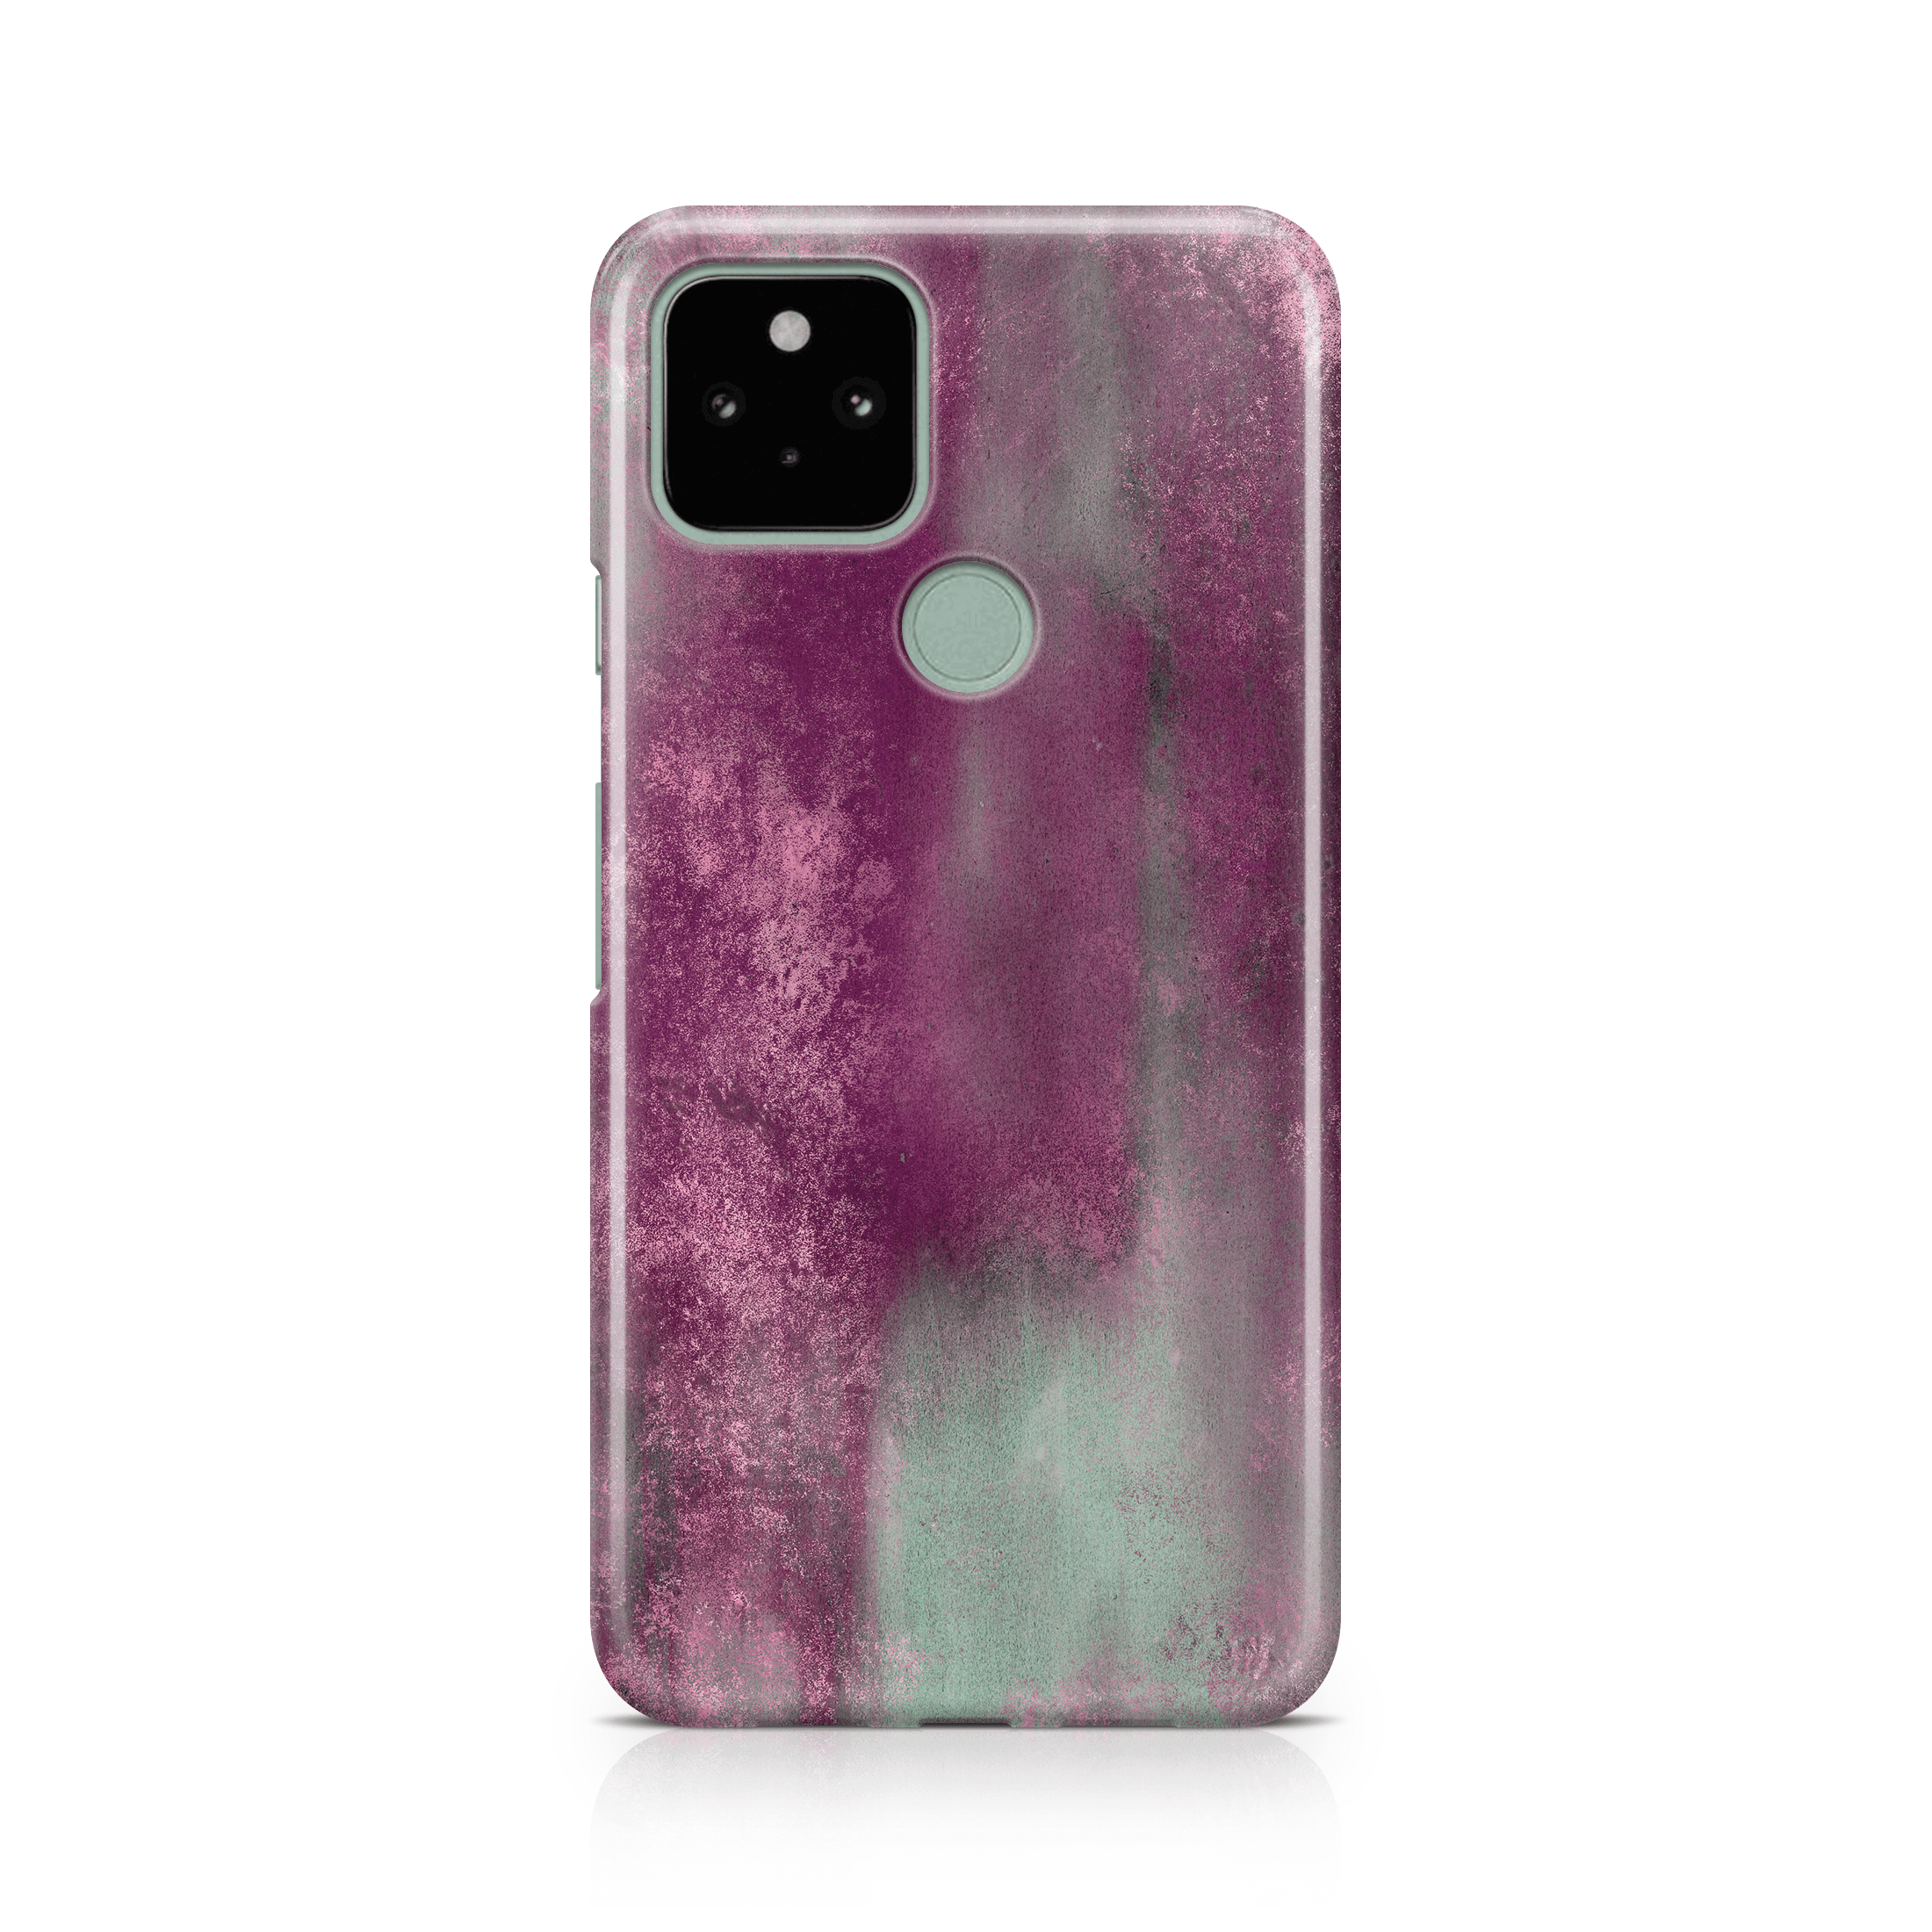 Rustic Rose II - Google phone case designs by CaseSwagger